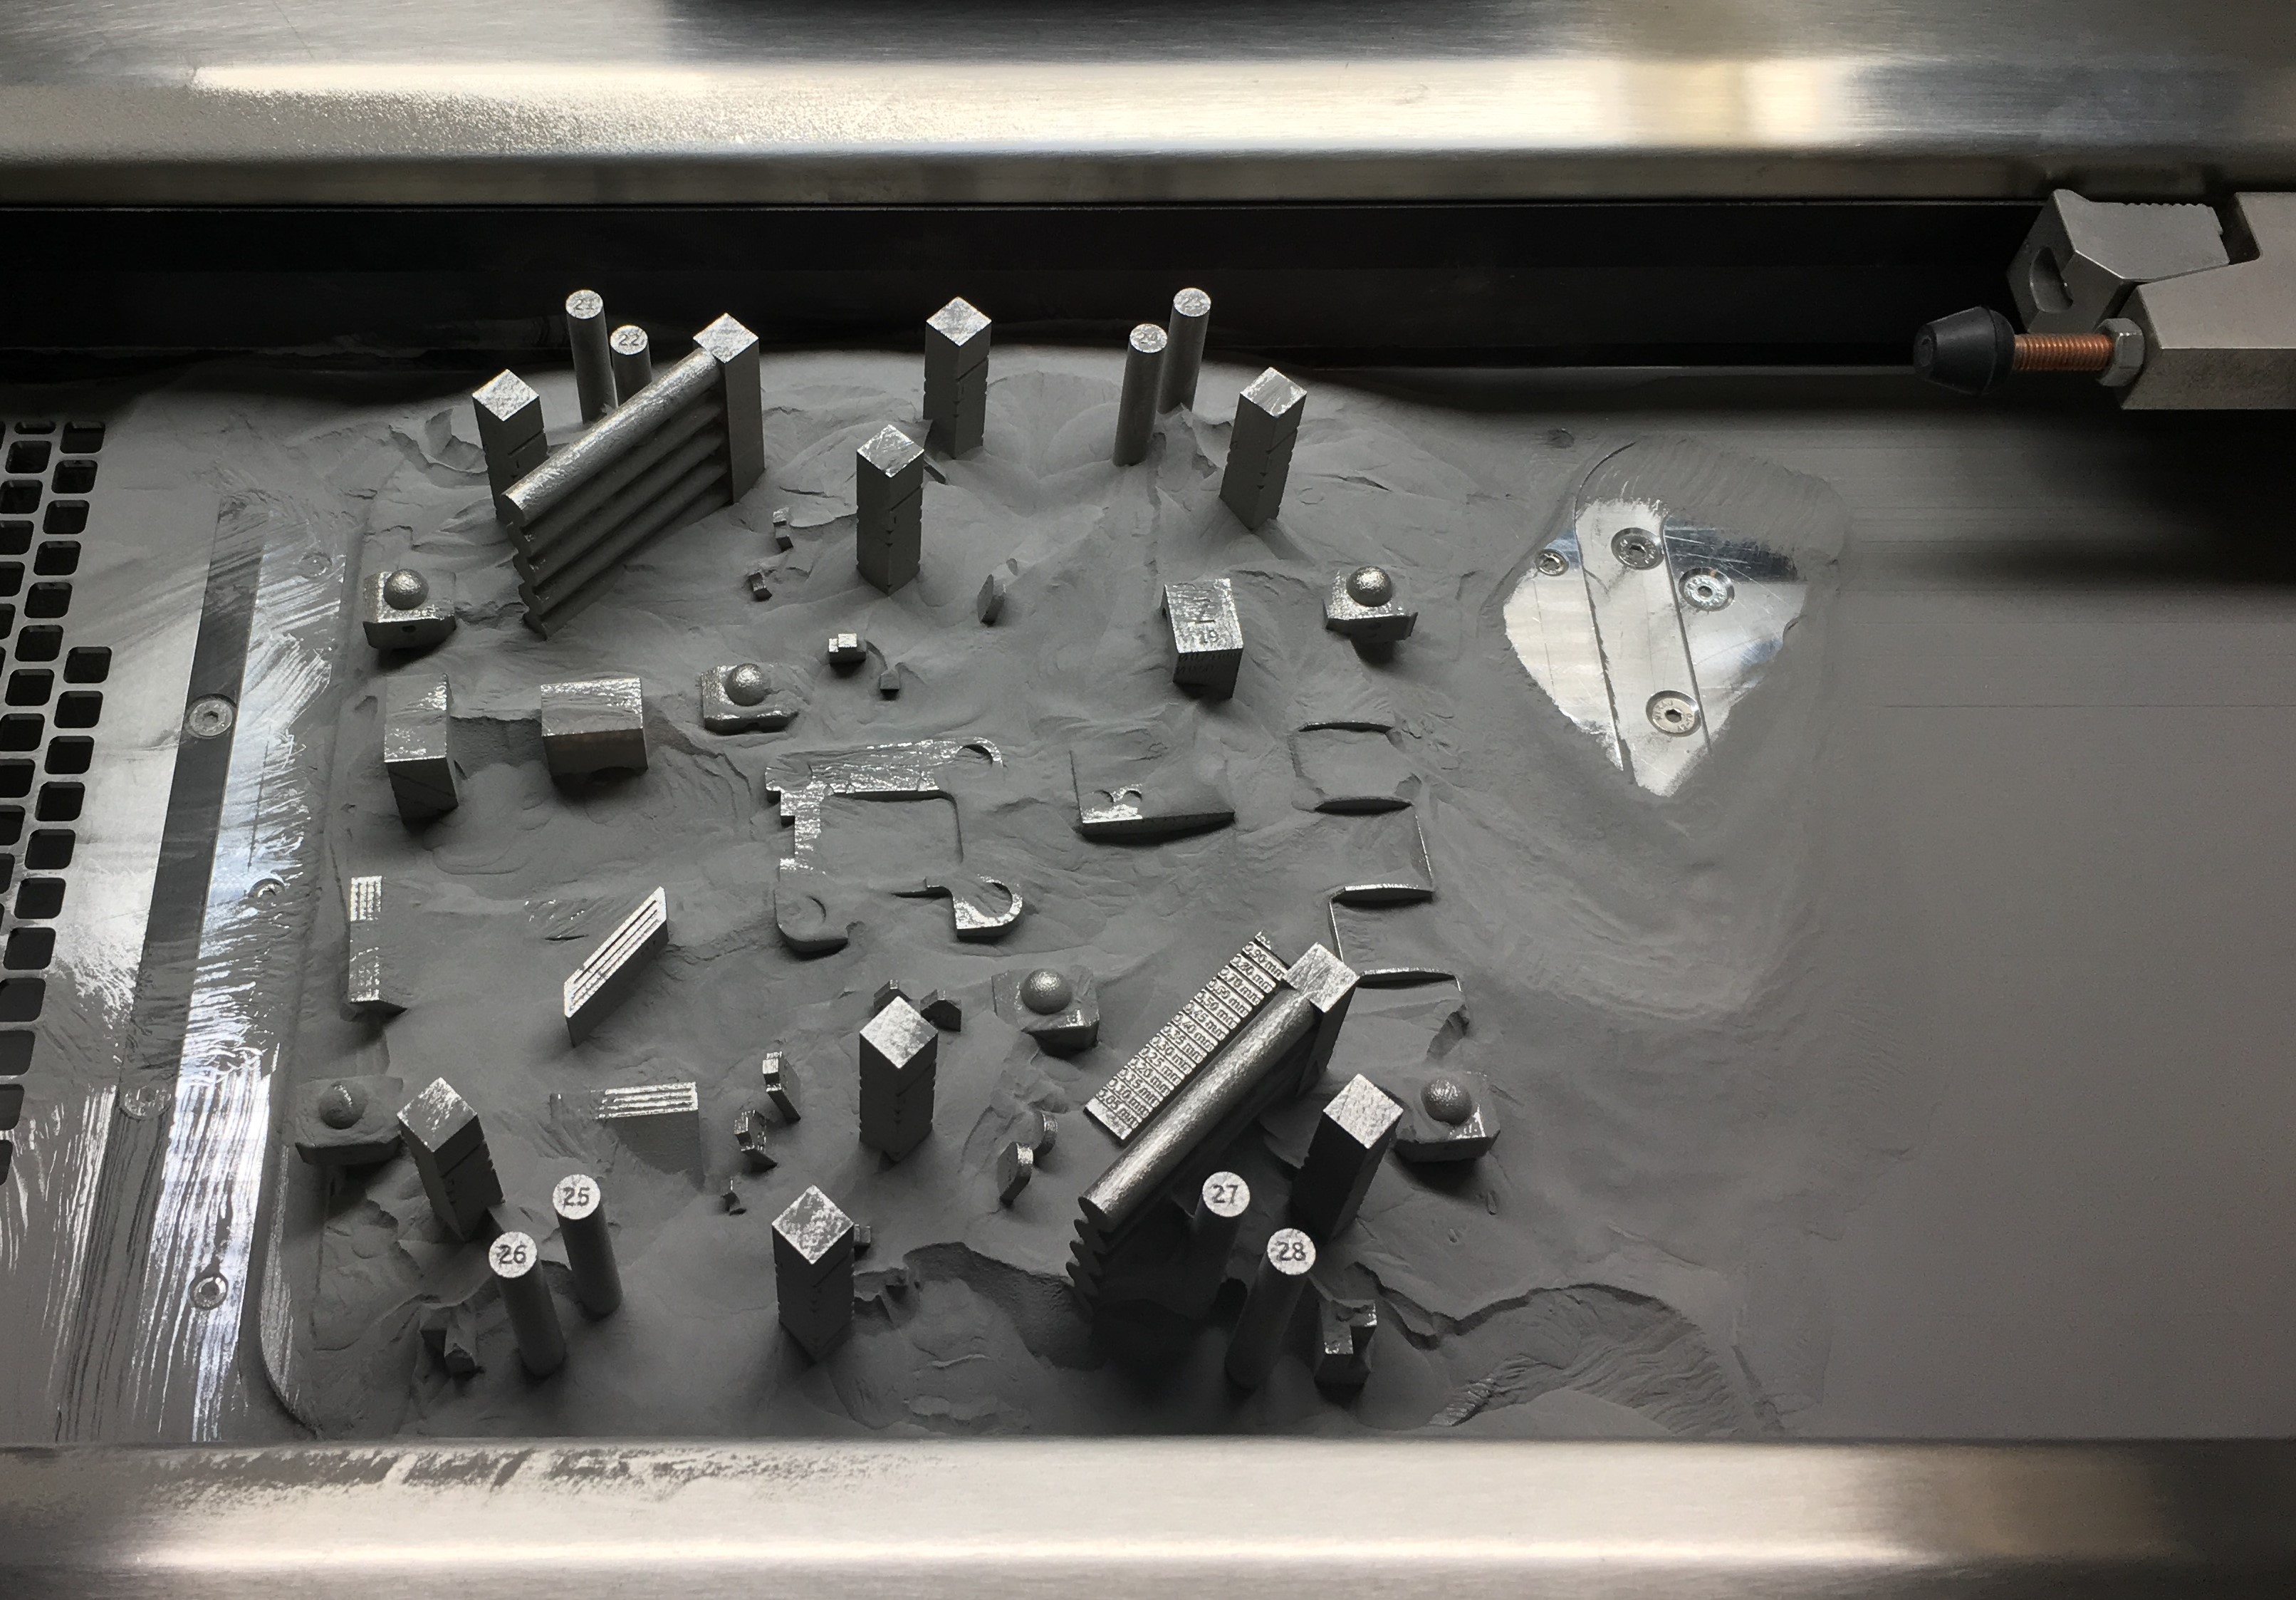 Using the Concept Laser M2 Cusing Printer, researchers create steel test parts that will be evaluated to learn more about the characteristics of components produced with additive manufacturing technology. (Source: Edward Cyr, University of New Brunswick, St. John)